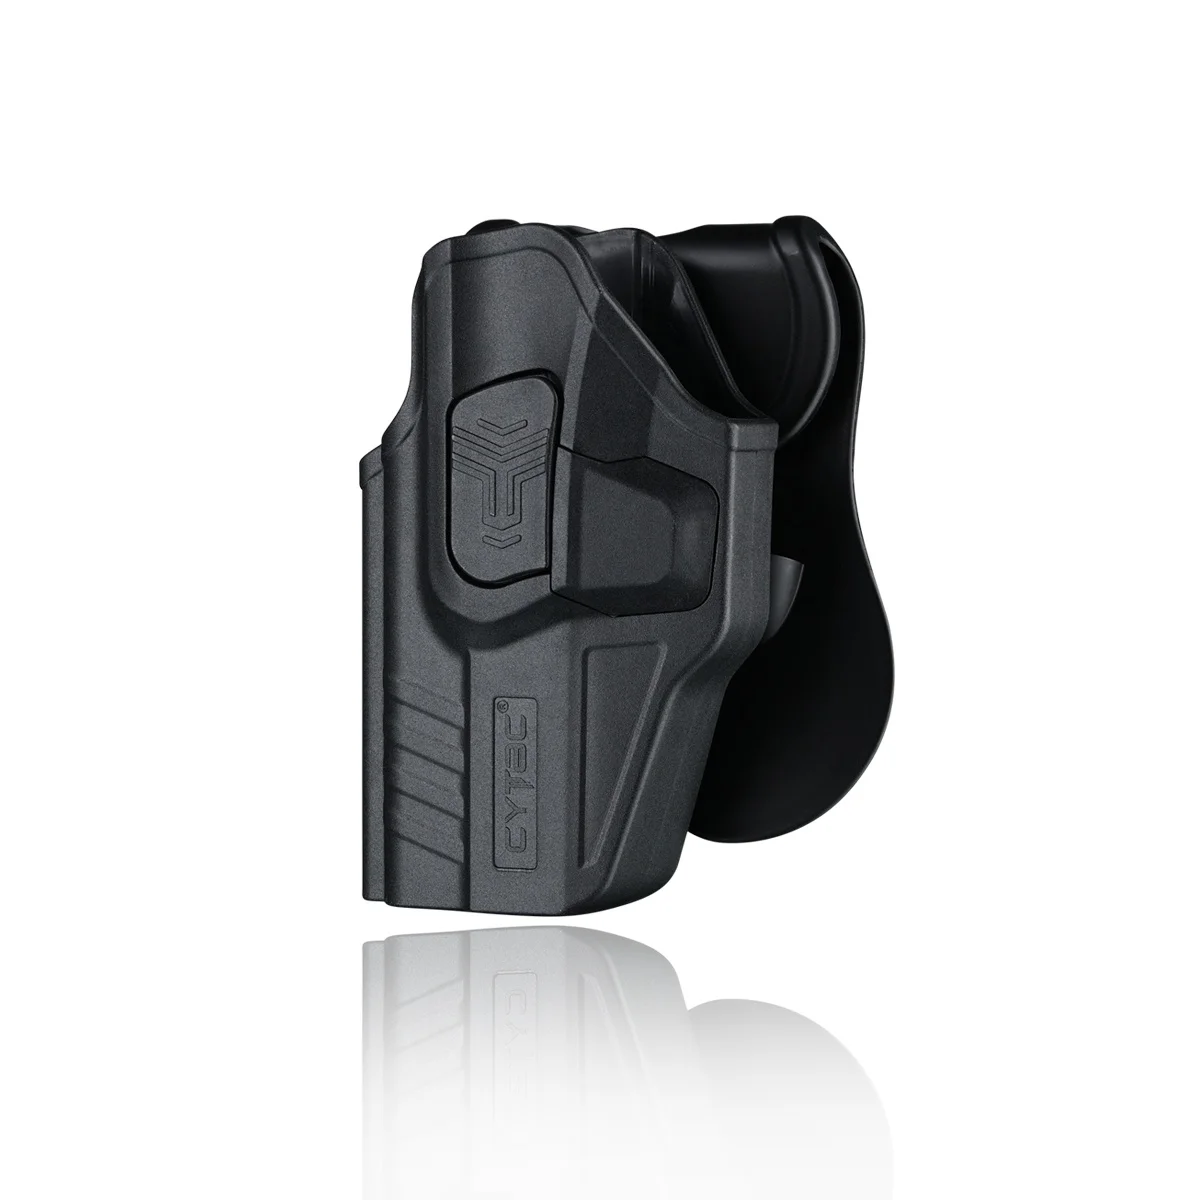 

Police Shooting Gear Cytac Tactical Gun Holster for Glock 19/23/32/19X With Paddle Left Hand, Black